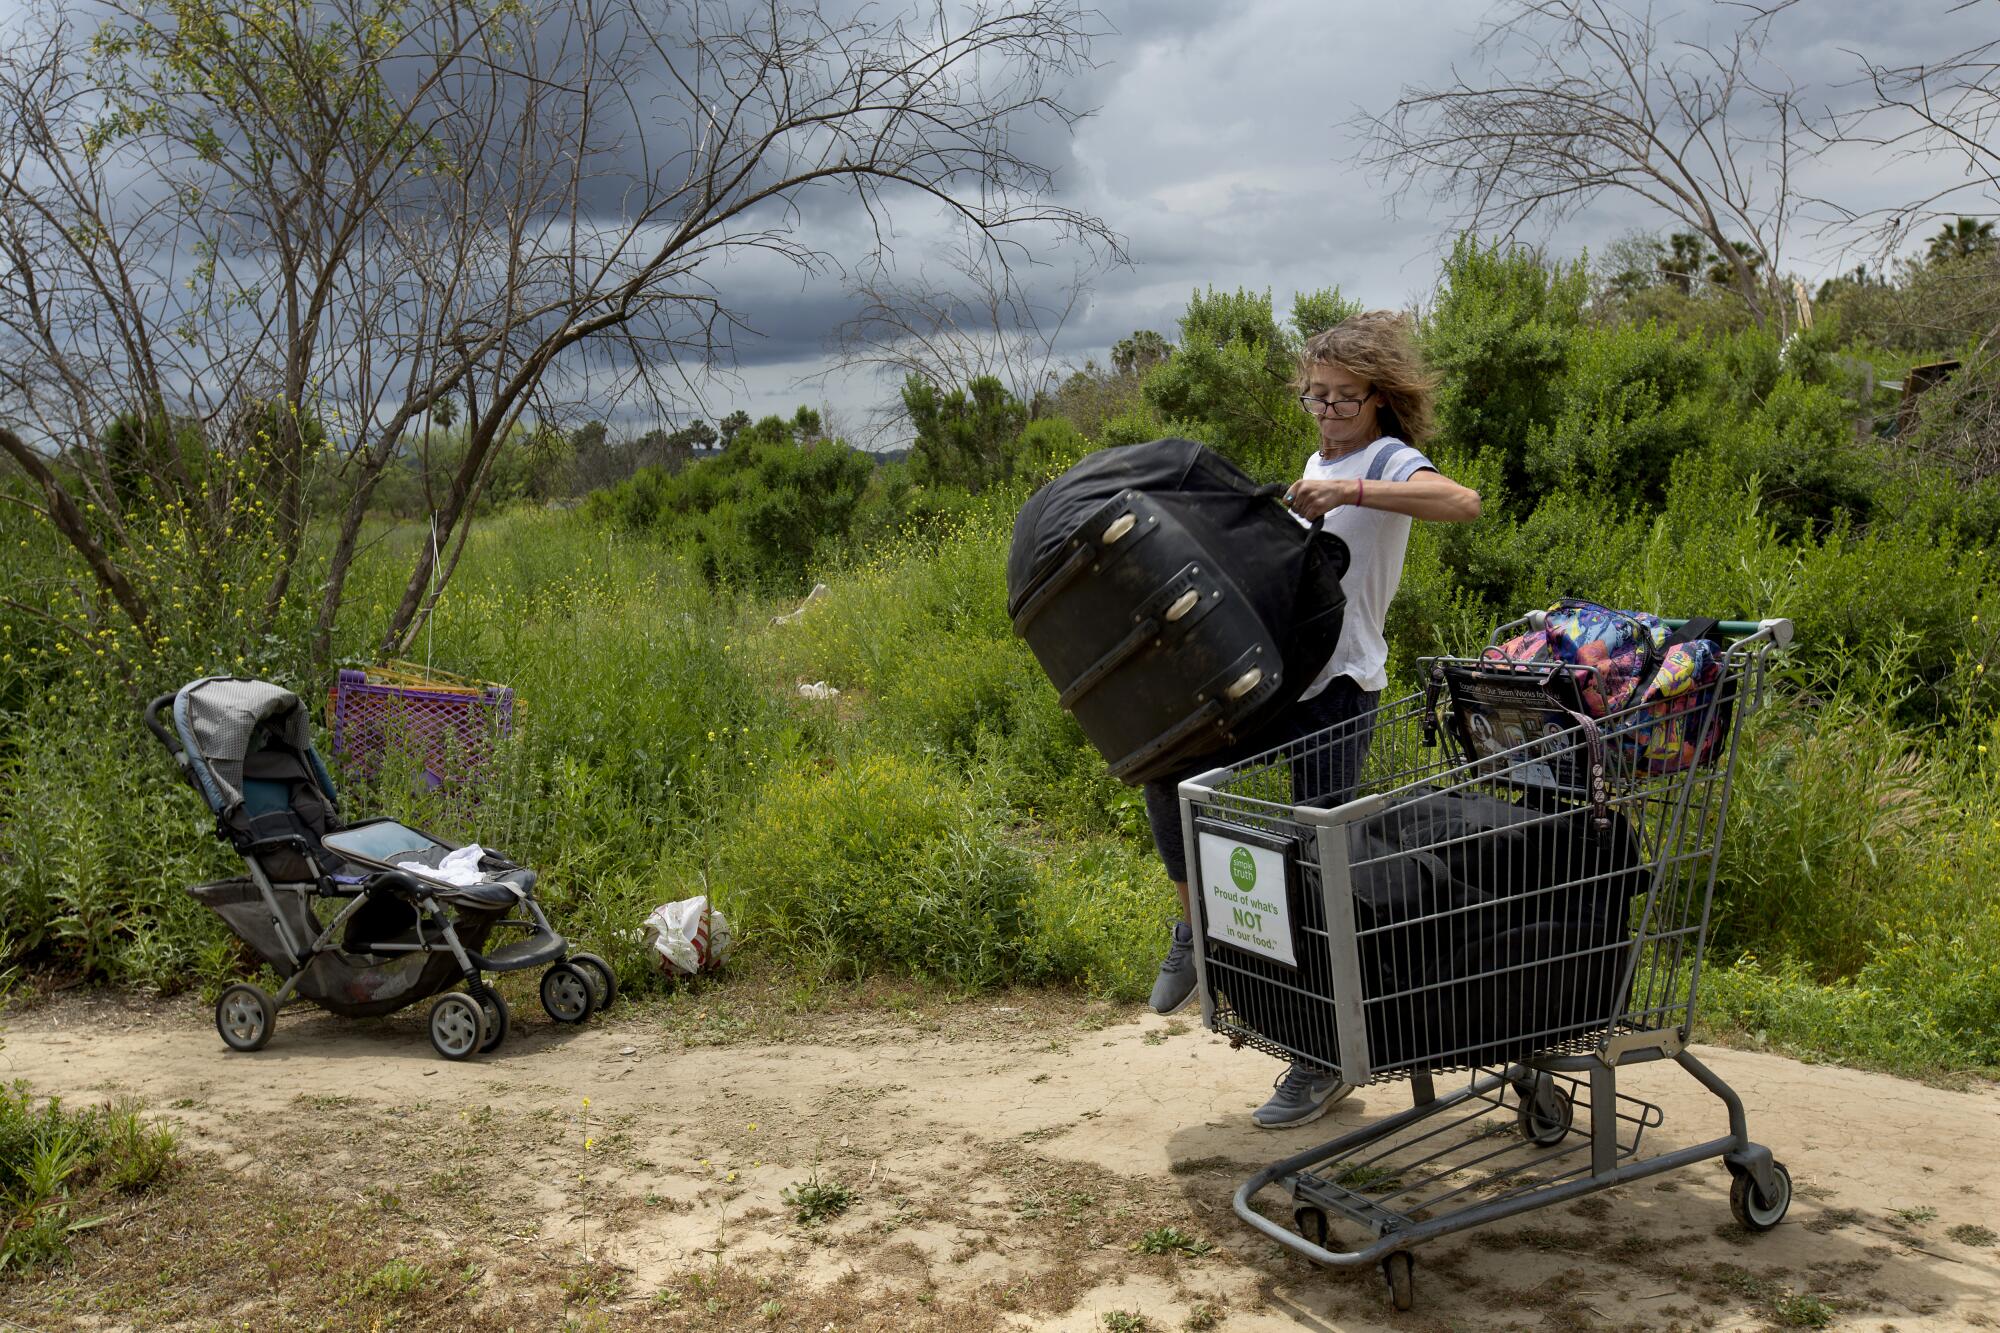 Elizabeth Bolton, 43, known as Alabama, packs her bags to leave a homeless encampment.